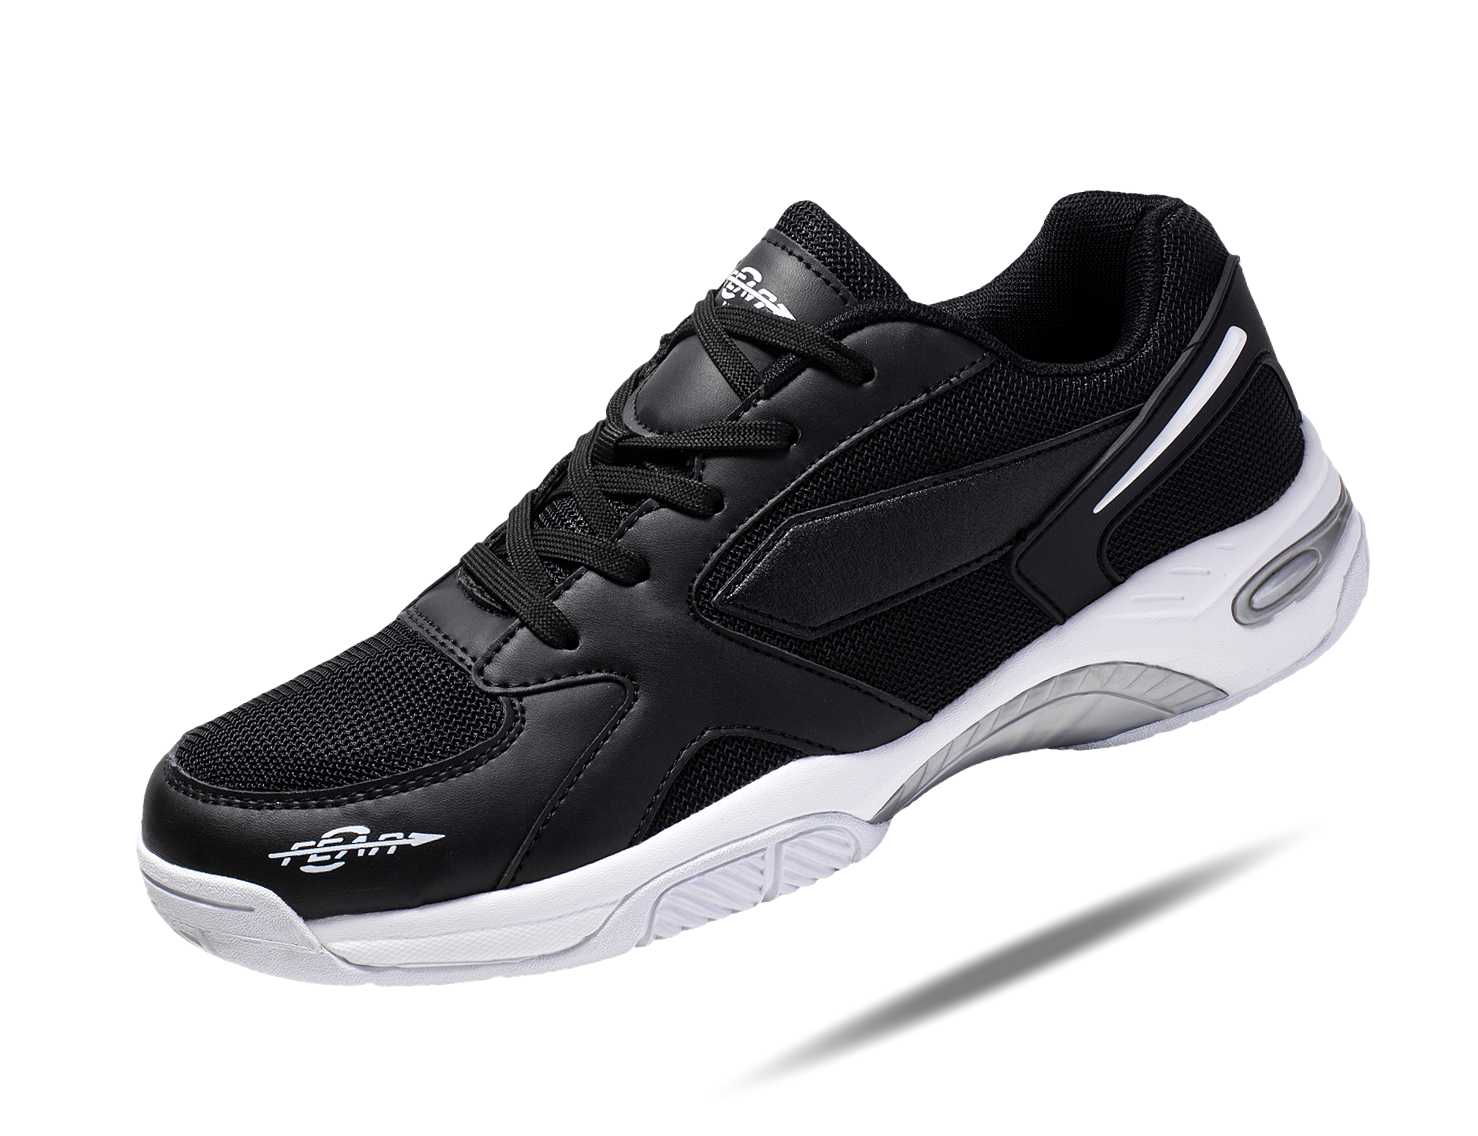 Fear0 NJ Men's High Arch Aggressive Firm Support Orthopedic Black Walking Shoes Fear0